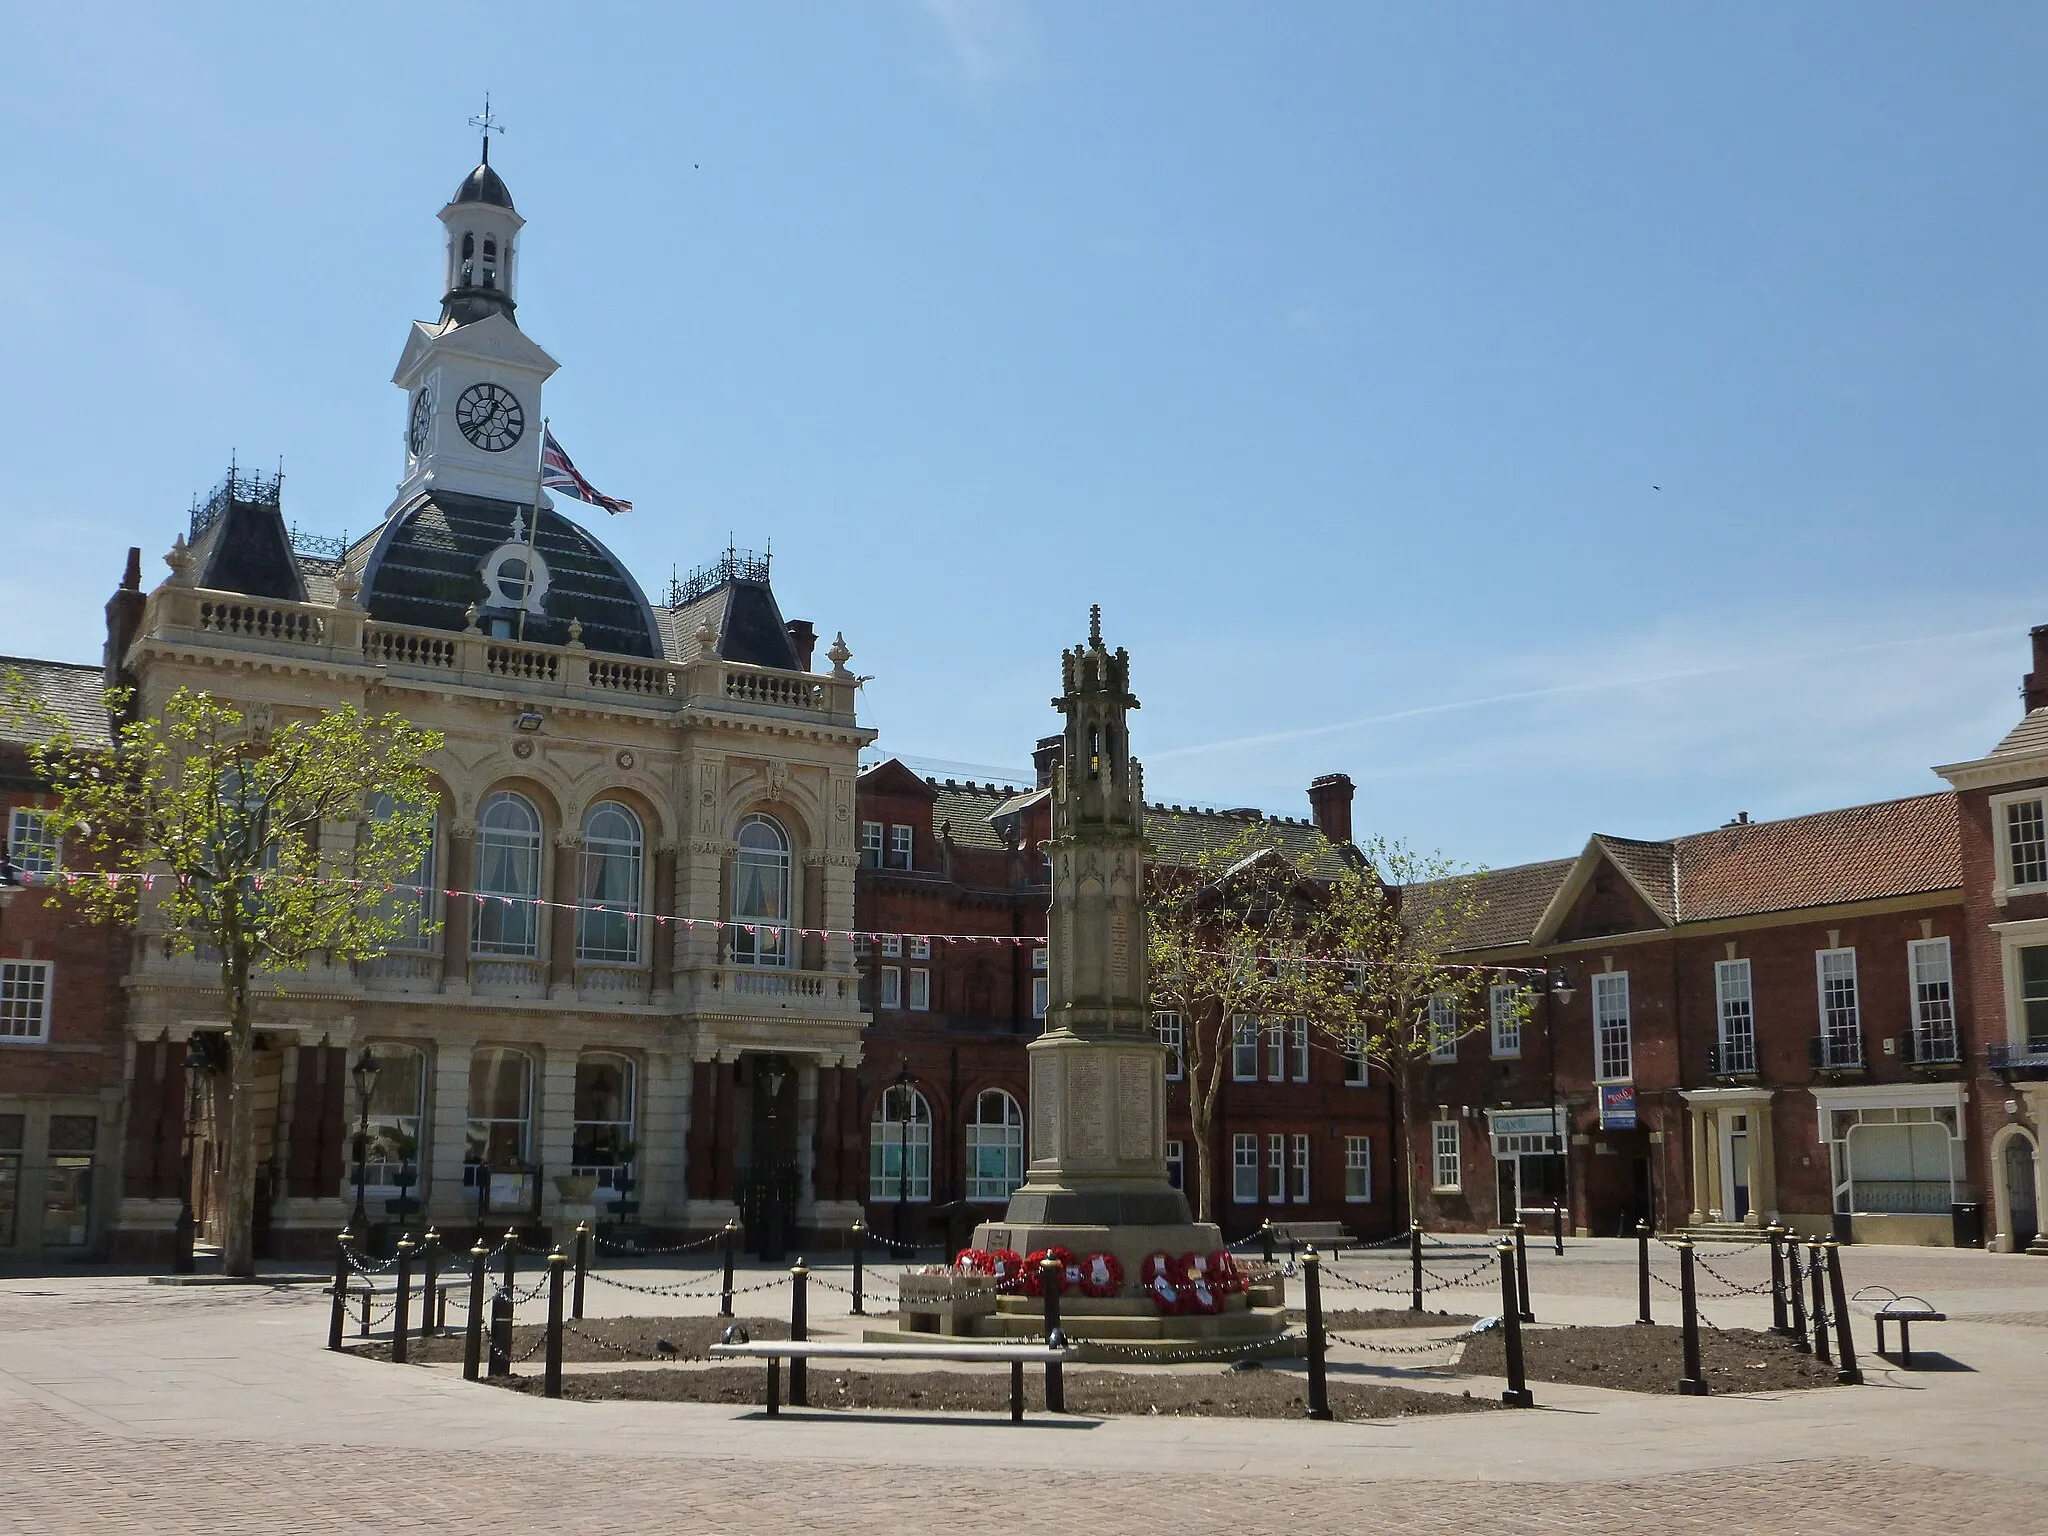 Photo showing: Retford Town Hall with additional Union Jack flag and Union Jack bunting to commemorate the sixtieth anniversary of Queen Elizabeth II's reign in the Diamond Jubilee.